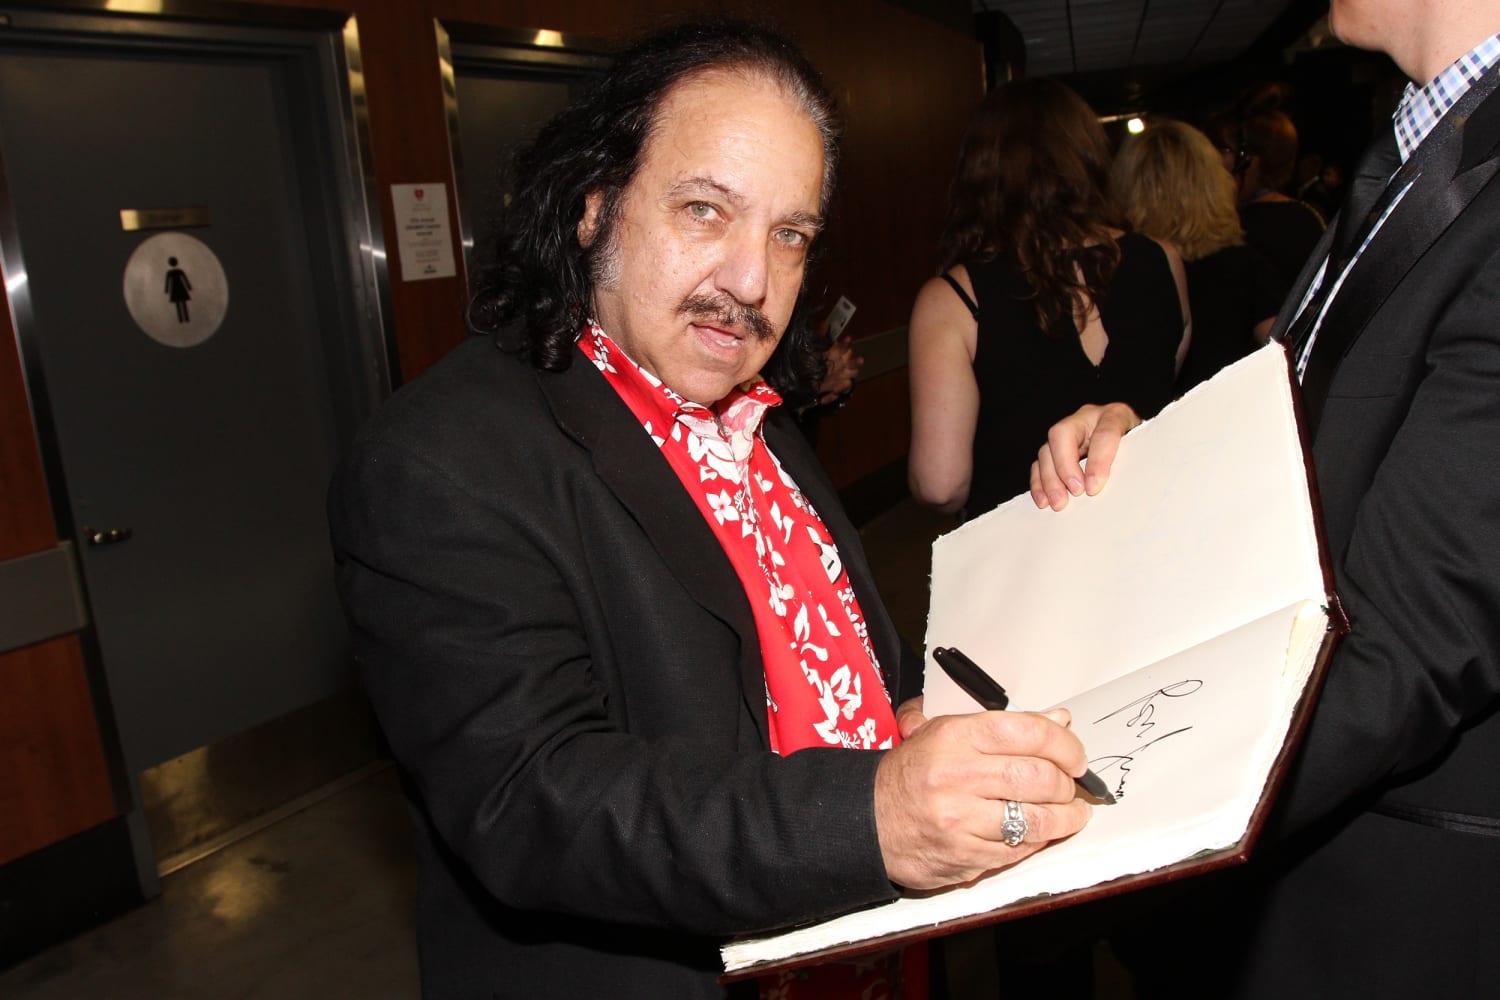 X X Rape Video - Porn actor Ron Jeremy charged with rape, sexual assault